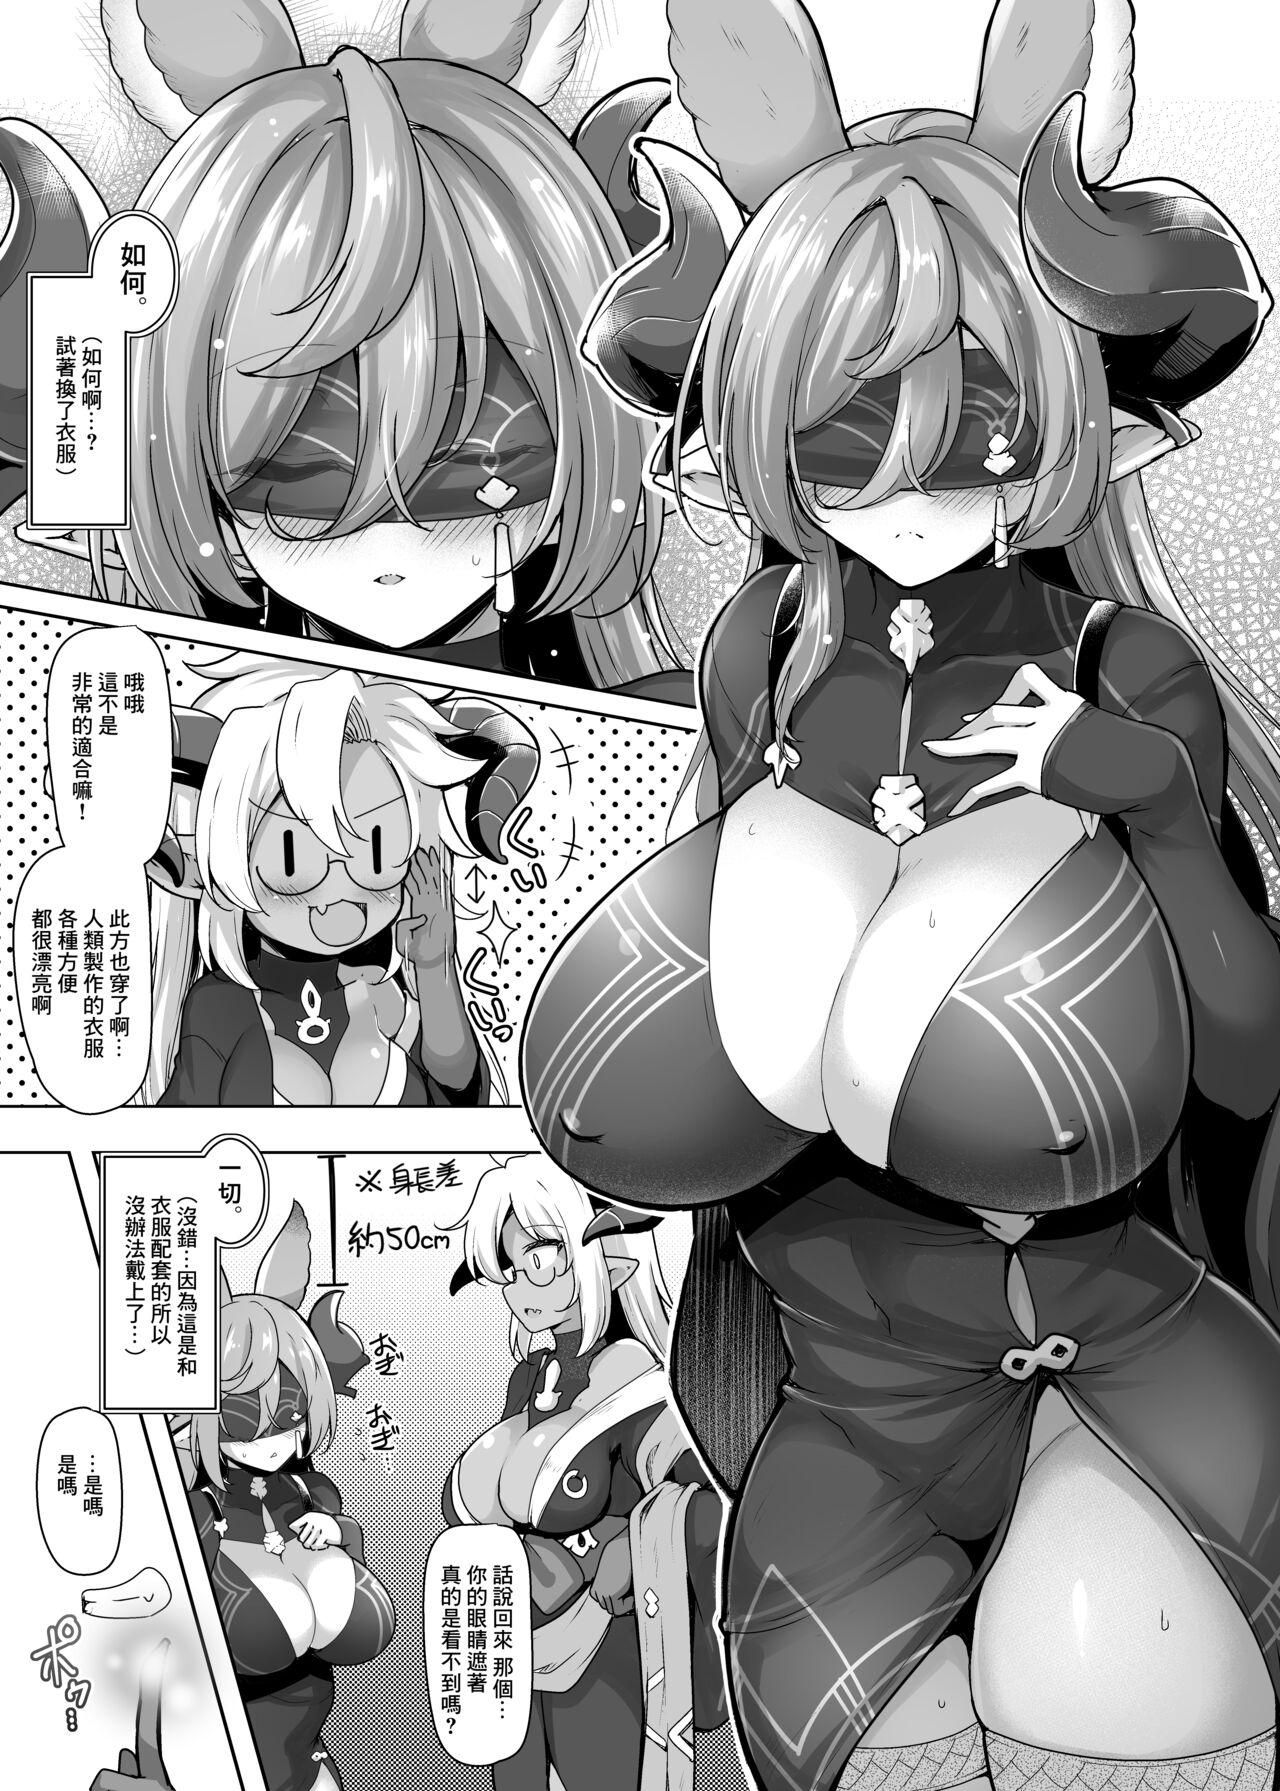 Hardcore Porn Meippai no Shukufuku o - Blessing of the Full Measure - Granblue fantasy Fuck For Cash - Page 5